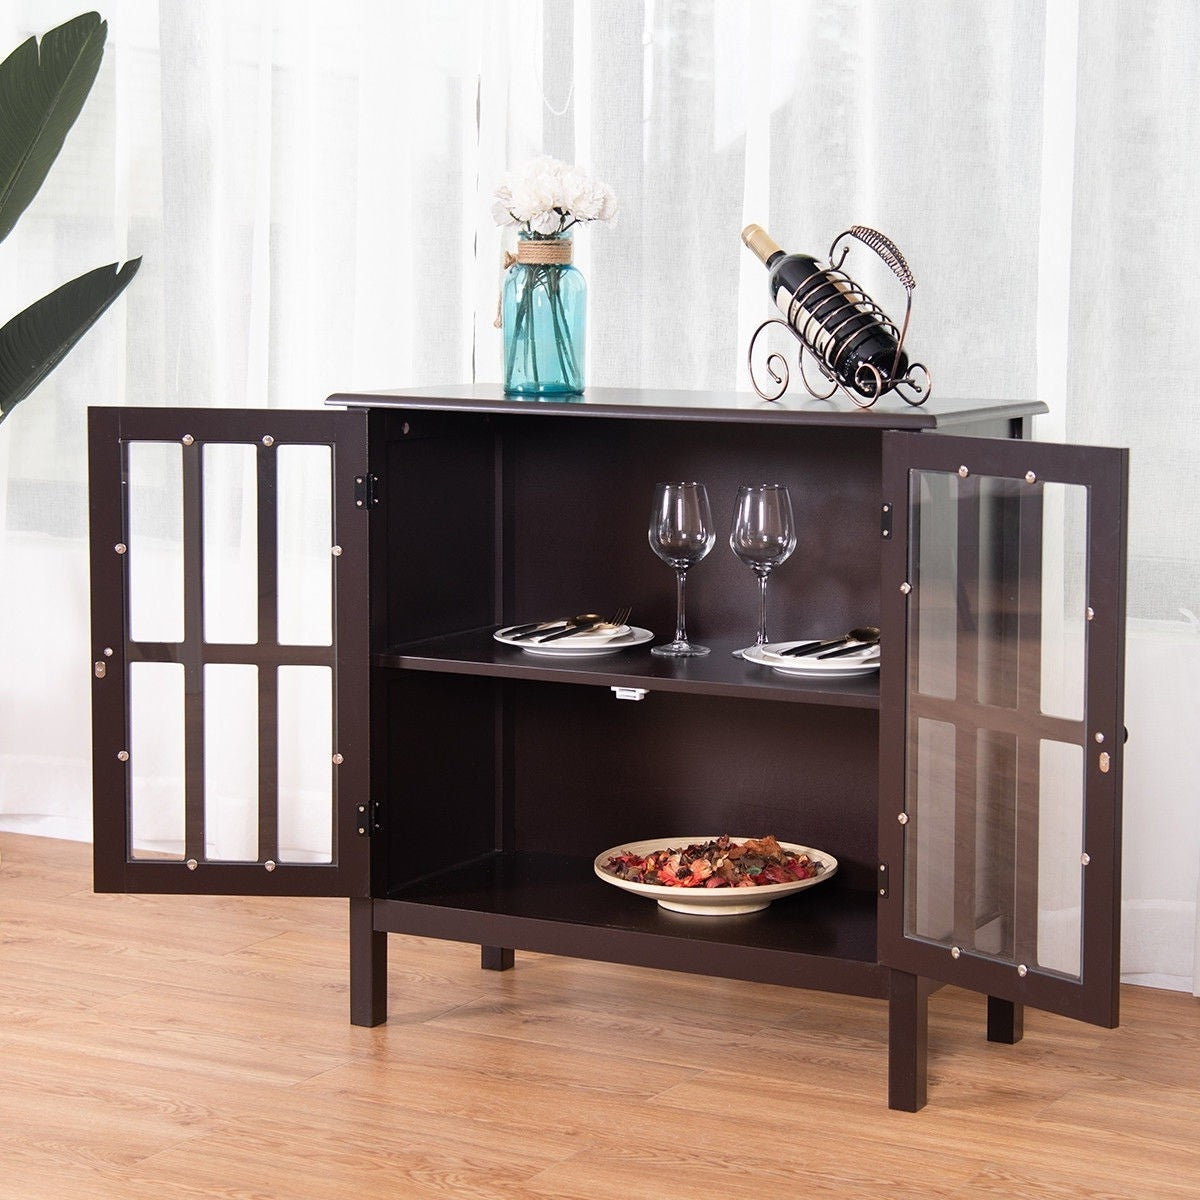 Dining > Sideboards & Buffets - Brown Wood Sideboard Buffet Cabinet With Glass Panel Doors